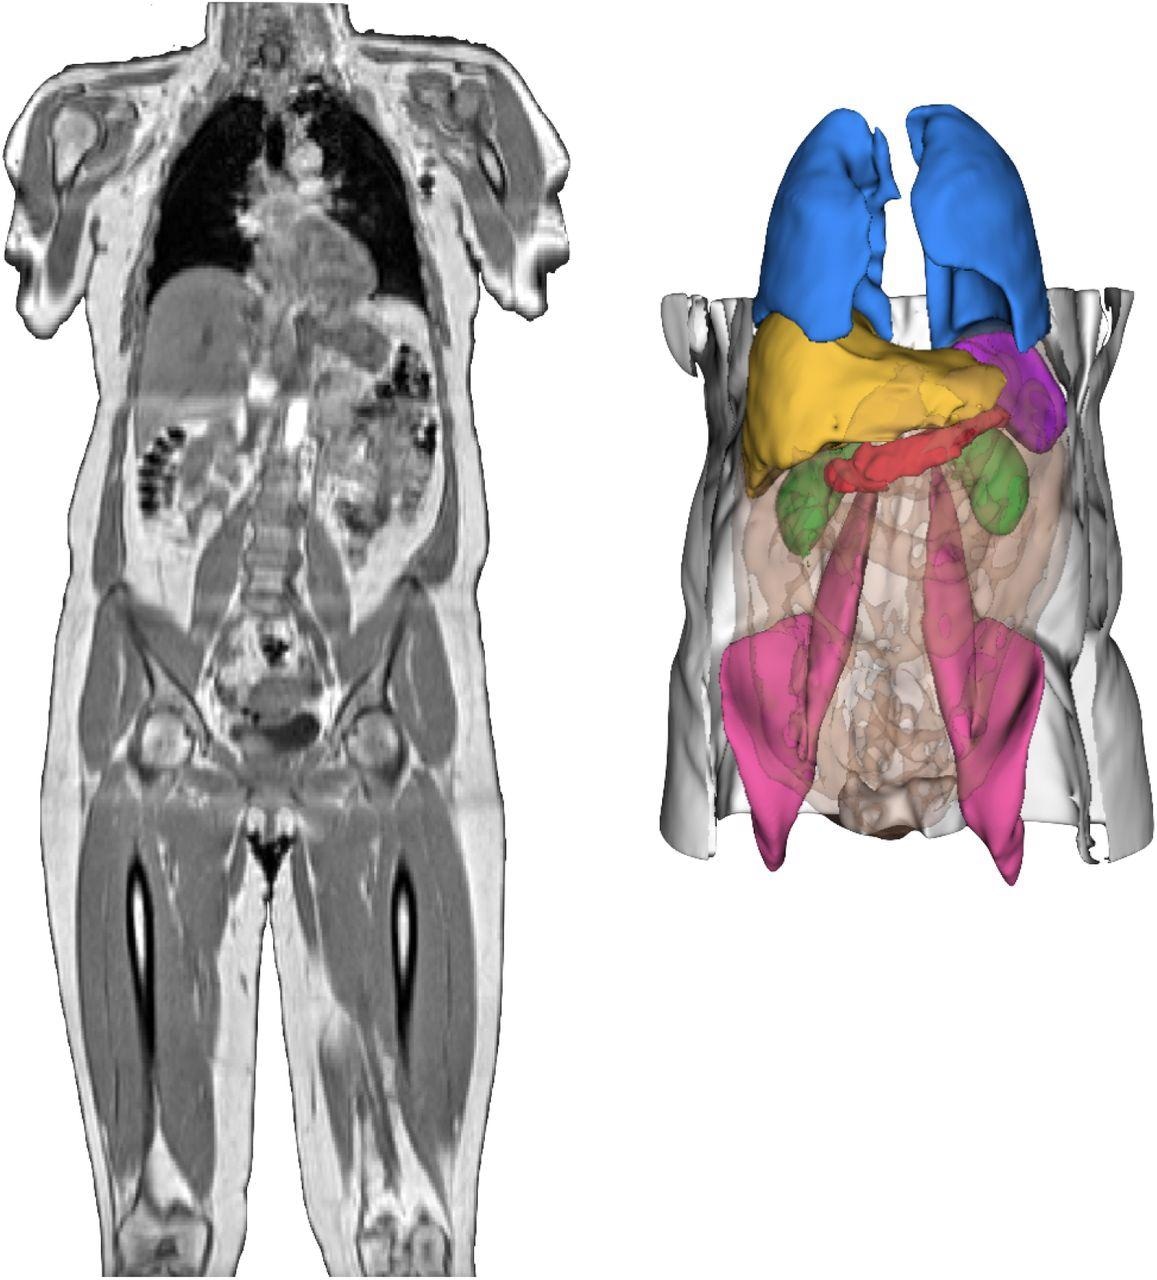 Neck-to-knee UK Biobank MRI acquisition of a COVID-19 study participant and 3D renderings of image-derived phenotypes obtained after image preprocessing and segmentation pipelines for that same participant. 3D segmentations: Liver (yellow), lungs (blue), spleen (purple), kidneys (green), abdominal subcutaneous adipose tissue (white), visceral adipose tissue (orange transparent), iliopsoas muscles (pink), pancreas (red).